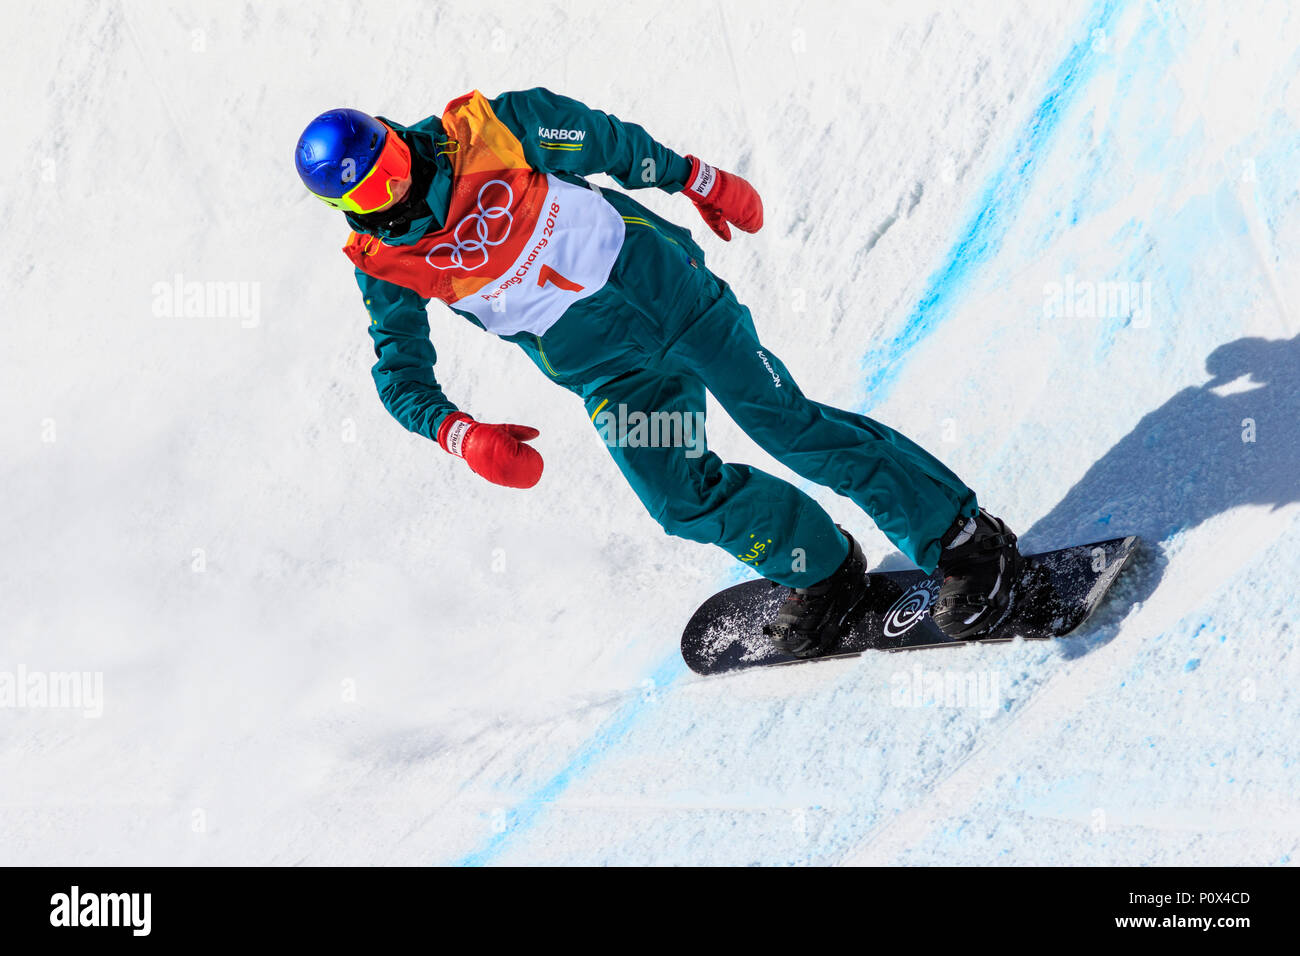 Scotty James (AUS)  competing in  the Men's Snowboarding Half Pipe Qualification at the Olympic Winter Games PyeongChang 2018 Stock Photo